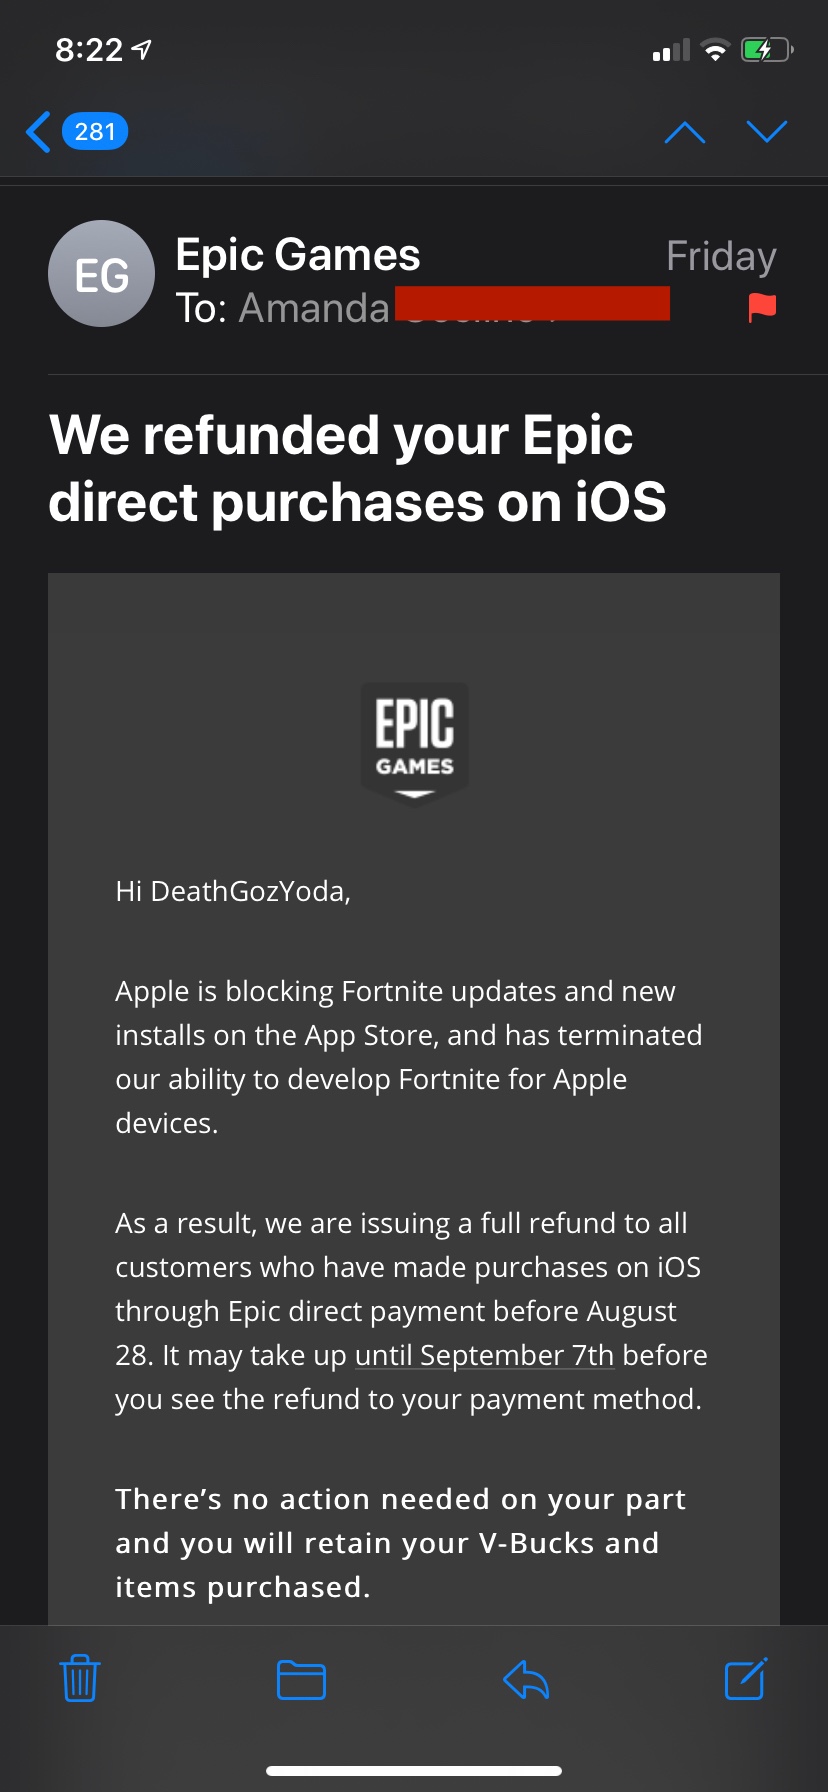 How To Get A Refund From Epic Games?